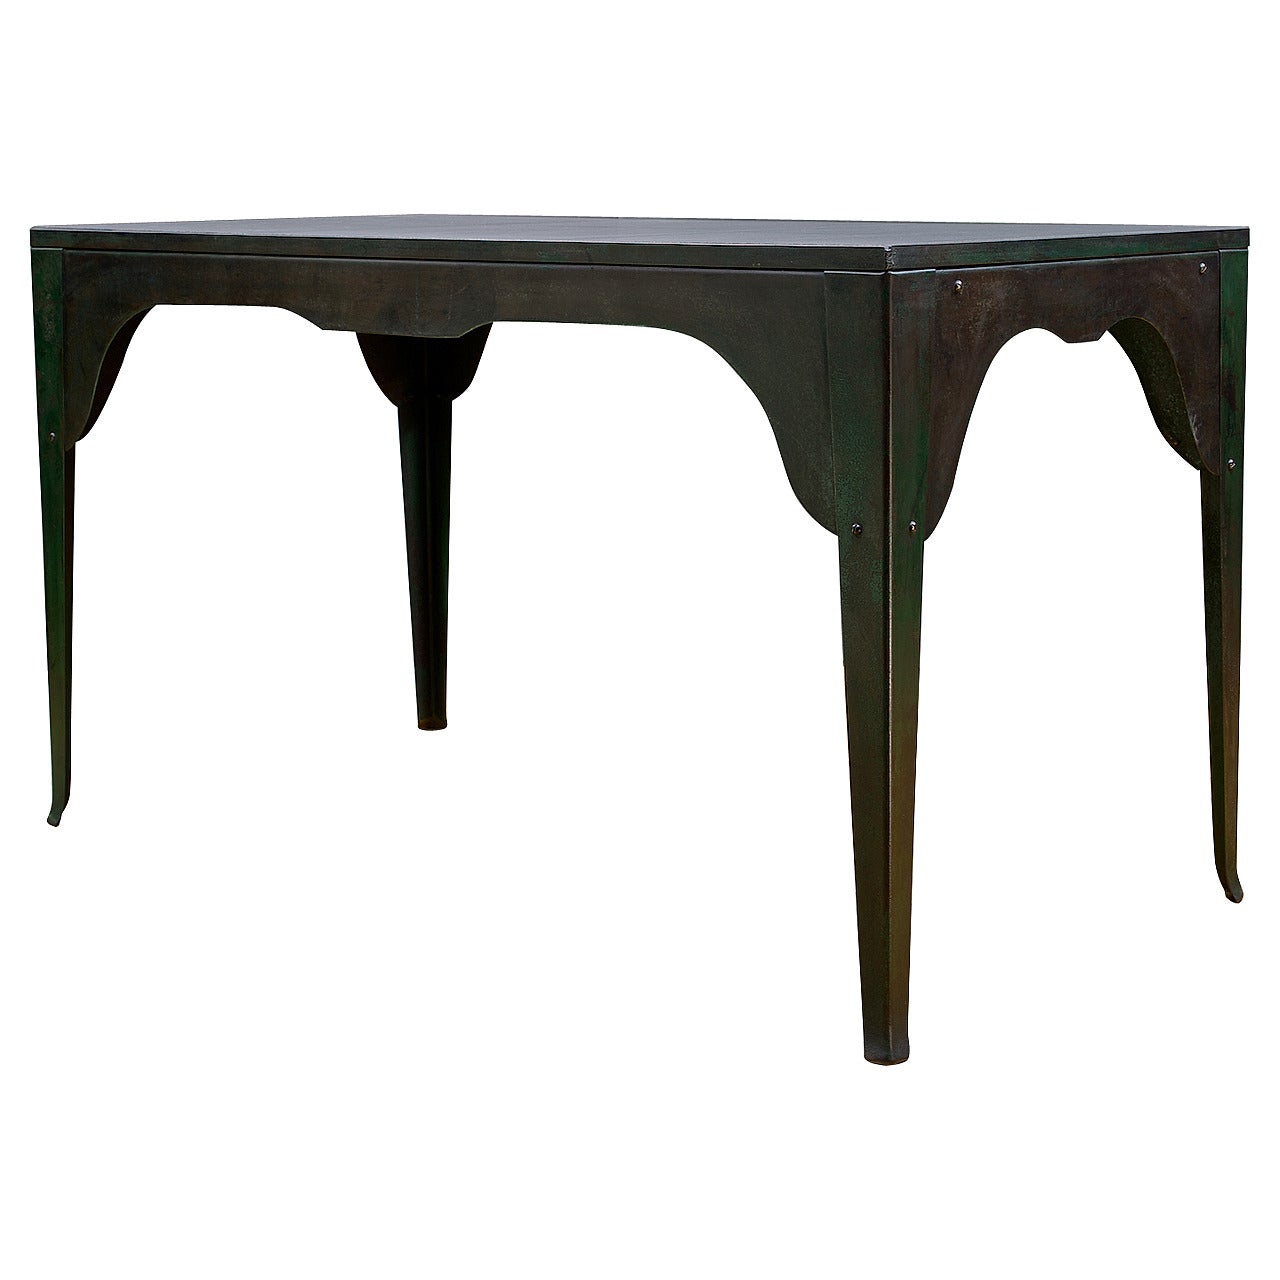 1920s Silhouetted Steel and Slate Industrial Work Table